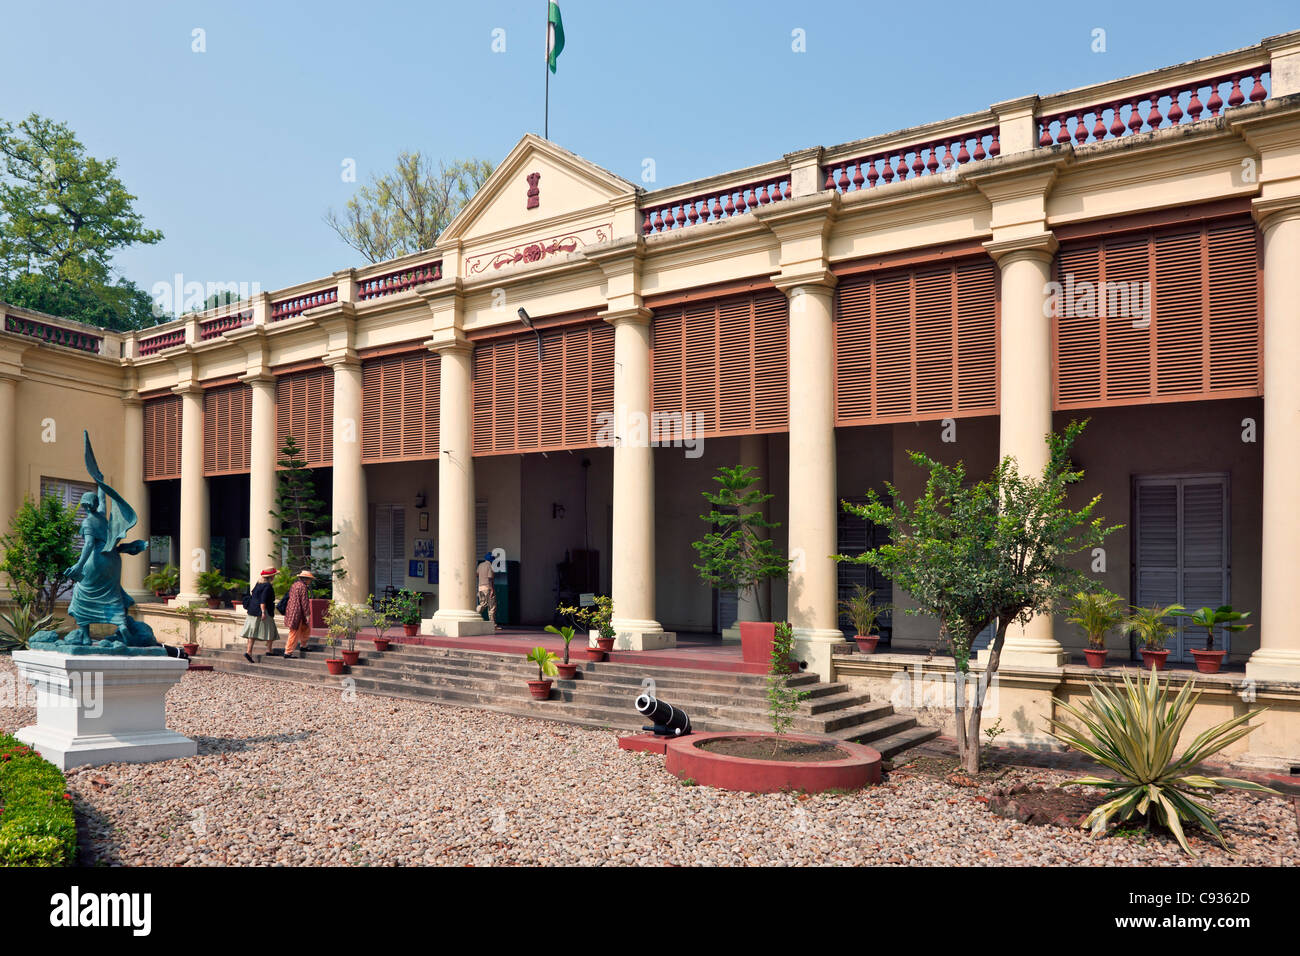 The Dupleix building at Chandernagore was named after a French Governor. It is now a museum. Stock Photo